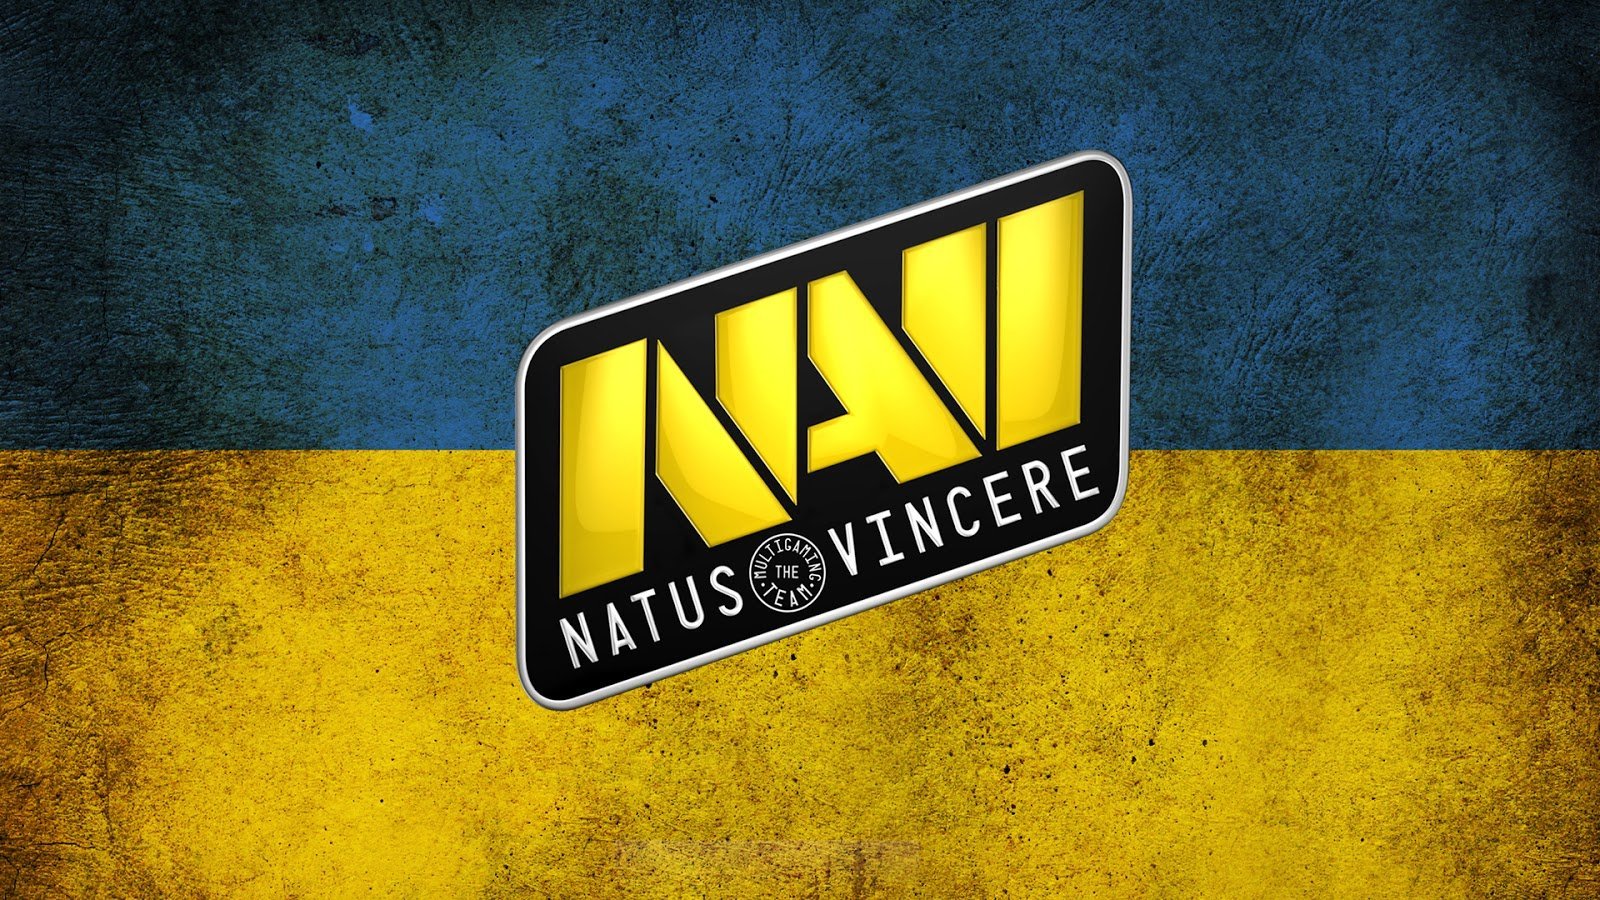 The NAVI team won the BLAST Premier: Fall Finals 2021 CS: GO, Alexander Kostylev was named the best player of the tournament